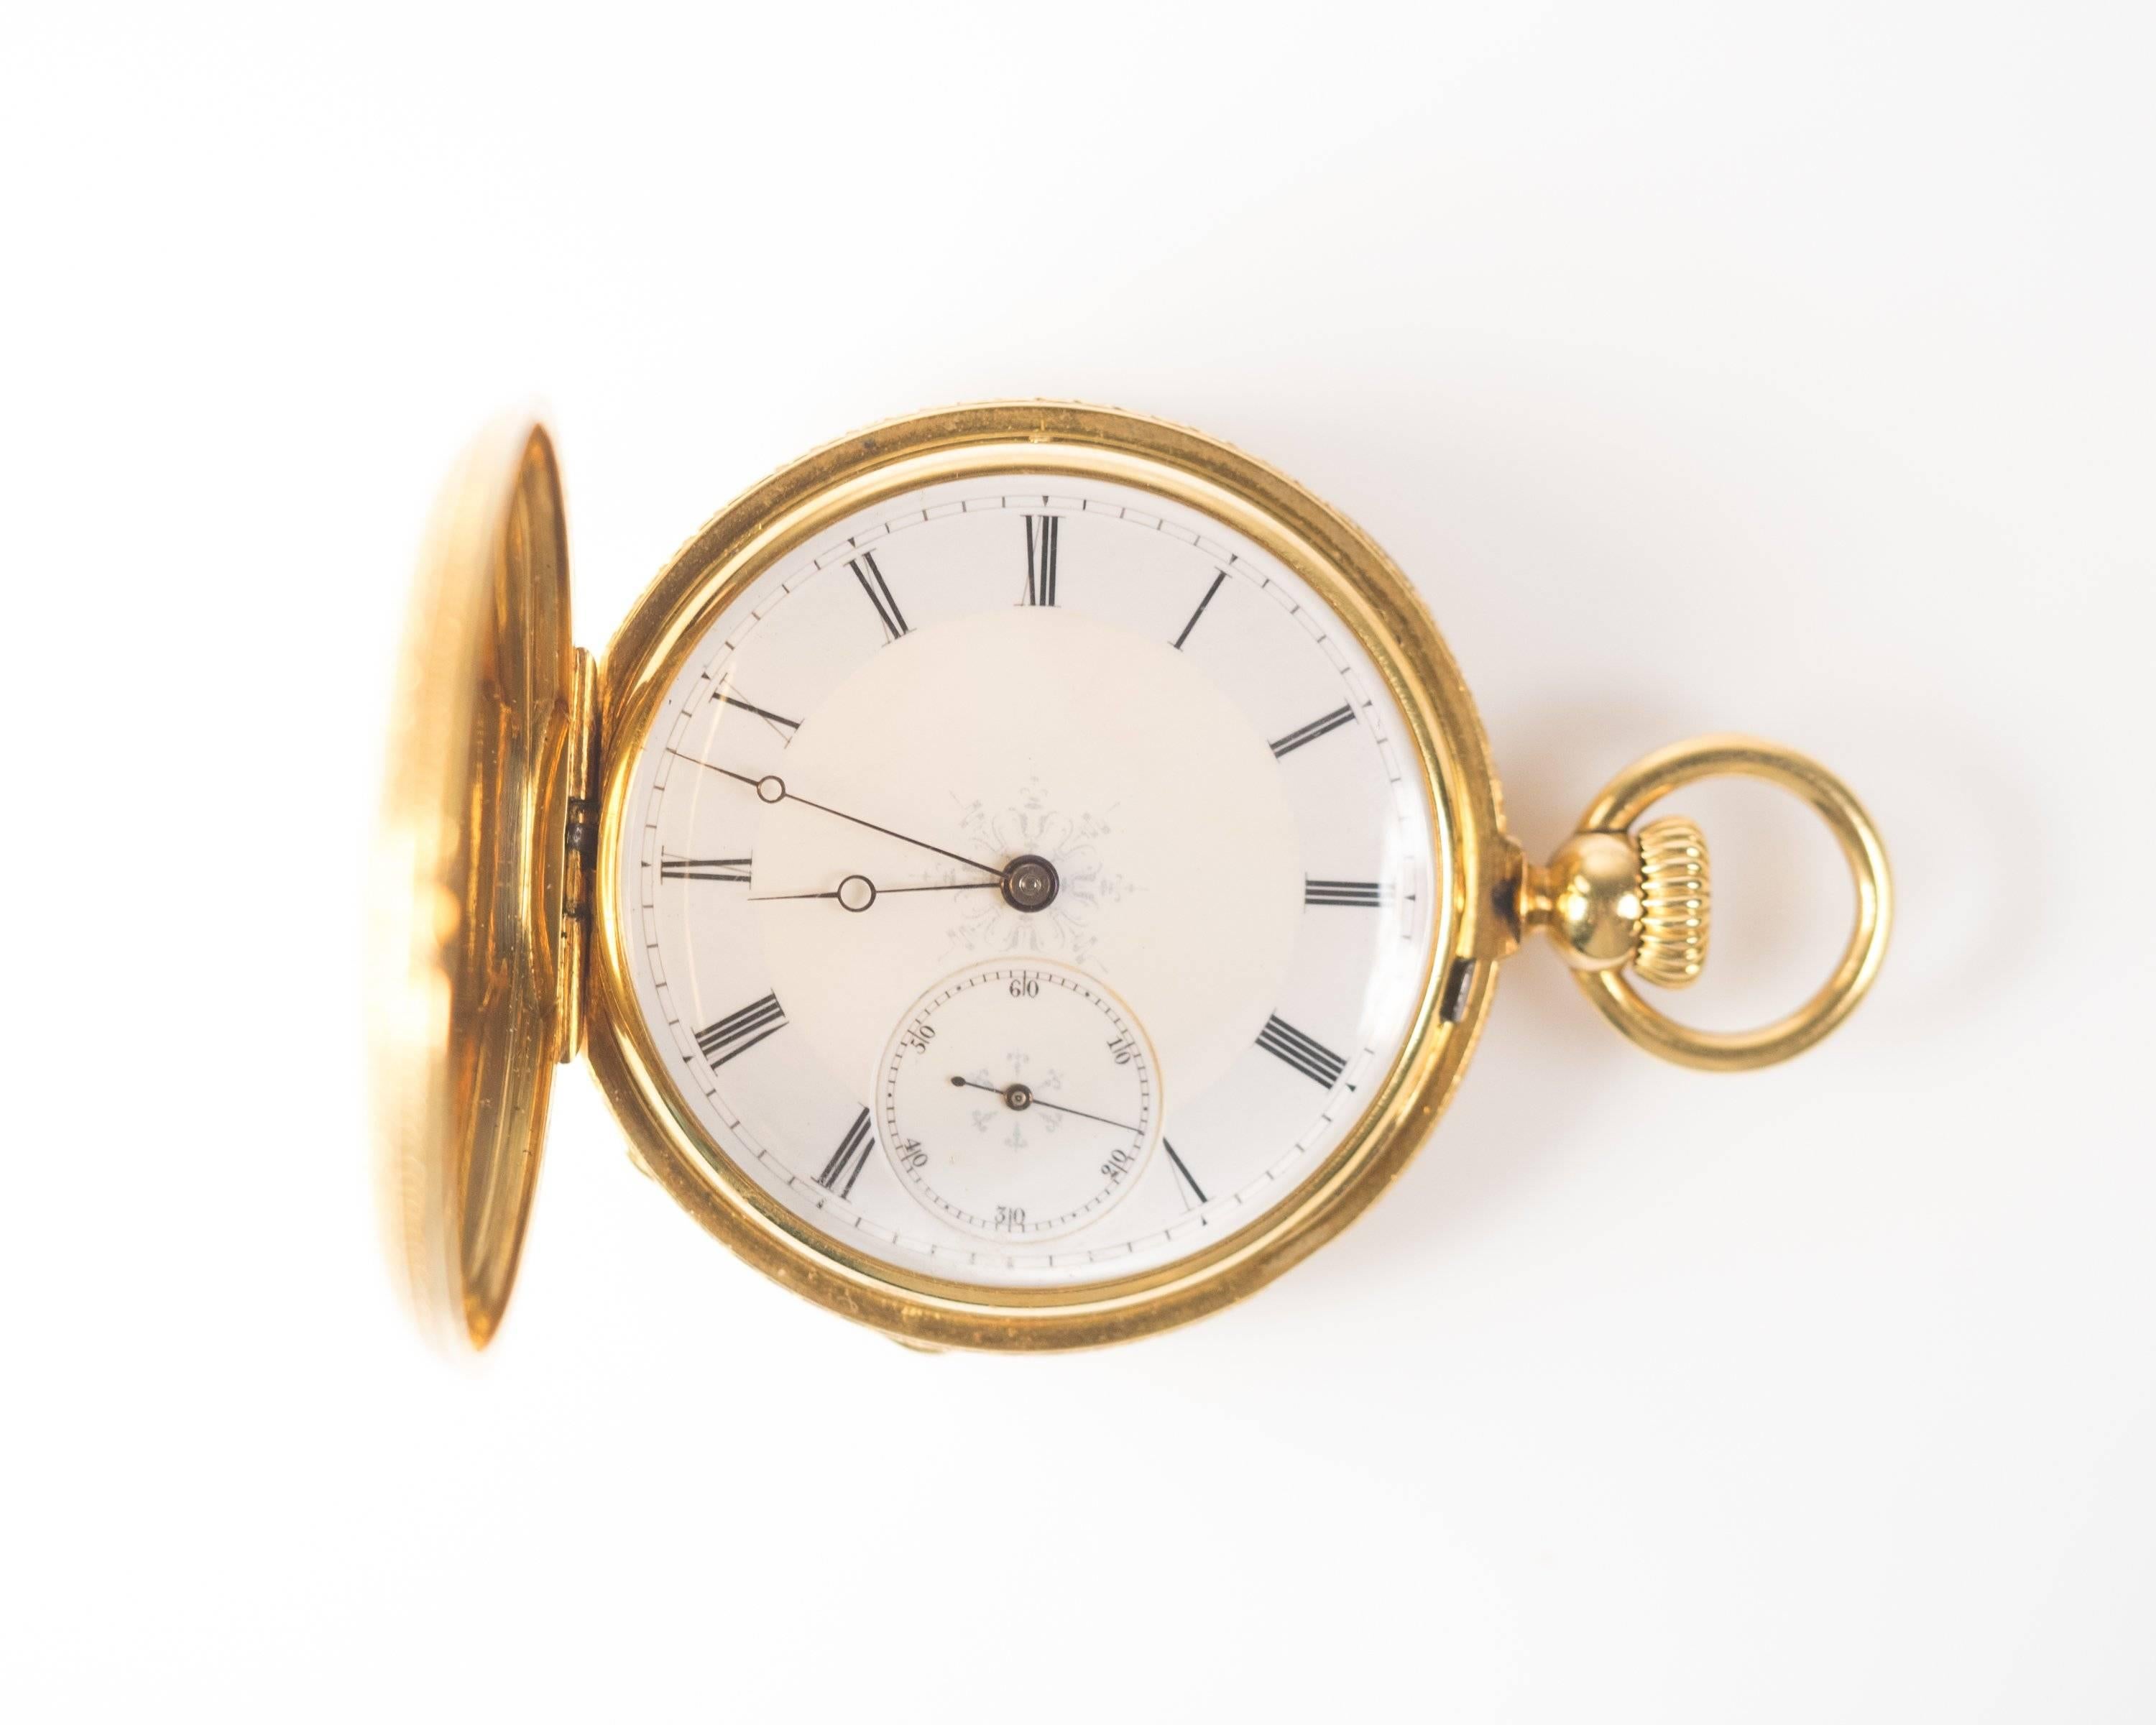 Unique 1880s Pocket Watch
Crafted in 18 Karat pocket watch
Made by Iconic watch maker Patek Philippe and sold at jeweler A.H. Rodent store front. The hallmarks of the jeweler are visible on the case back. 

Pocket watch features a porcelain and